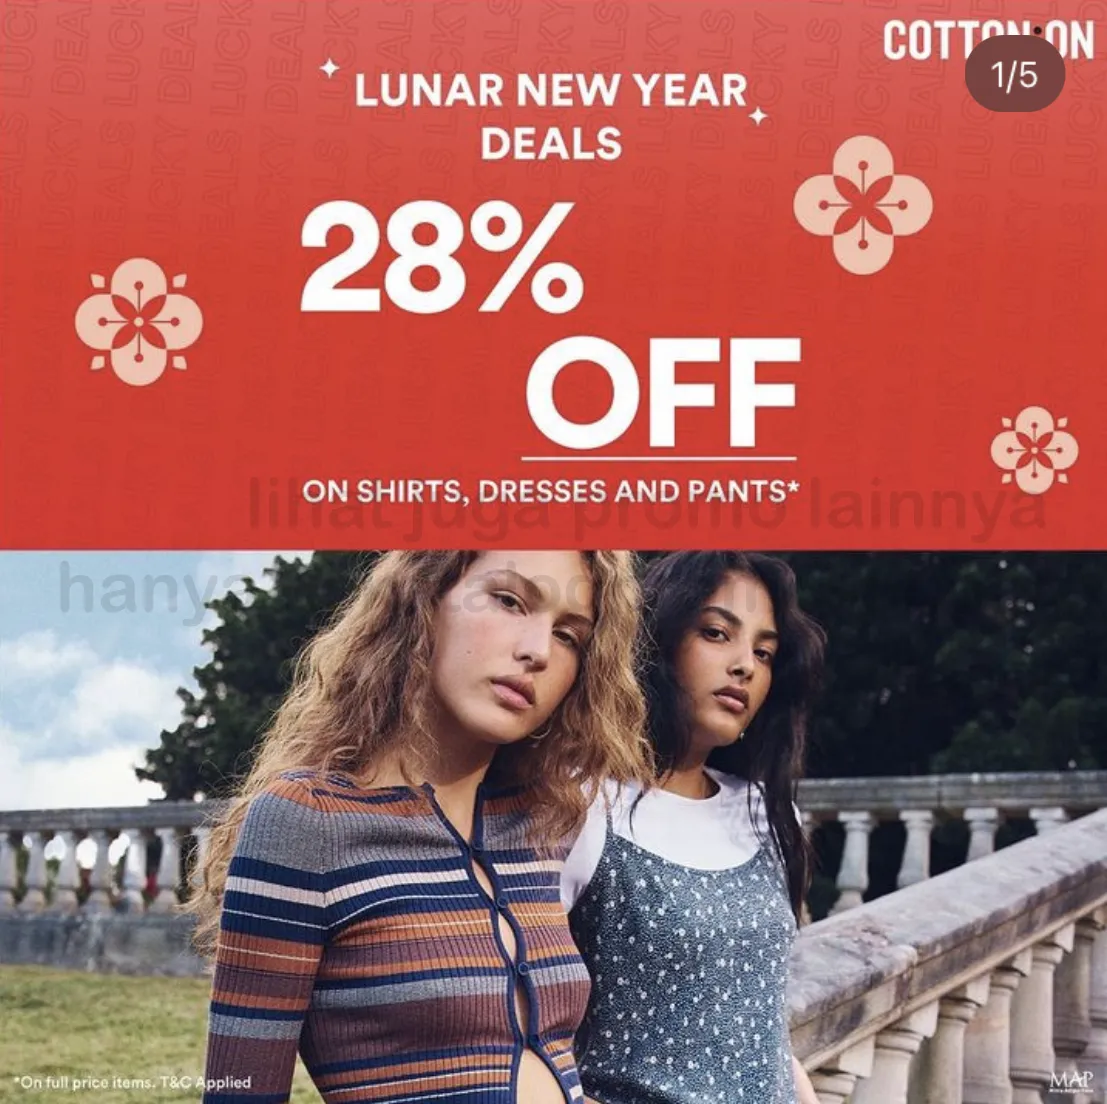 Promo COTTON ON Lunar New Year Deals - DISCOUNT 28% on Shirts / Dresses / Pants